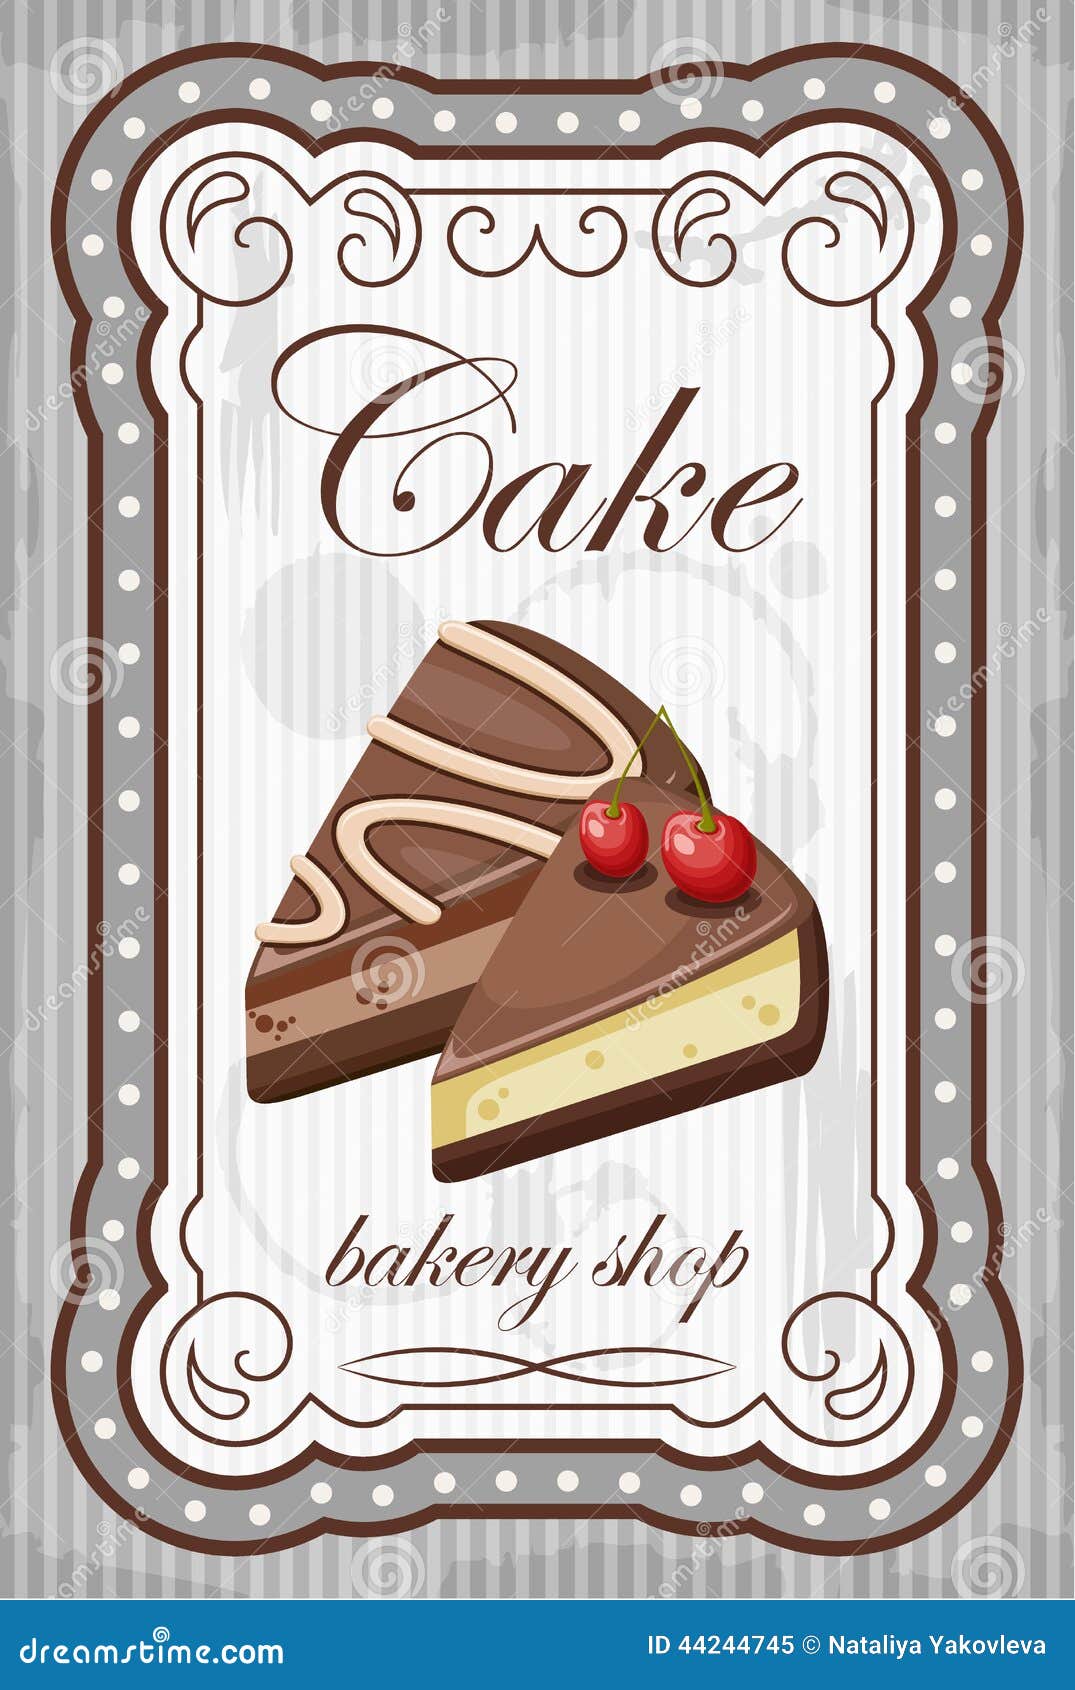 Design poster made to target an audience for cakes and pastries, in hopes  of bringing in more customers. I used procreate for the backdrops and the  rest was done in adobe illustrator.